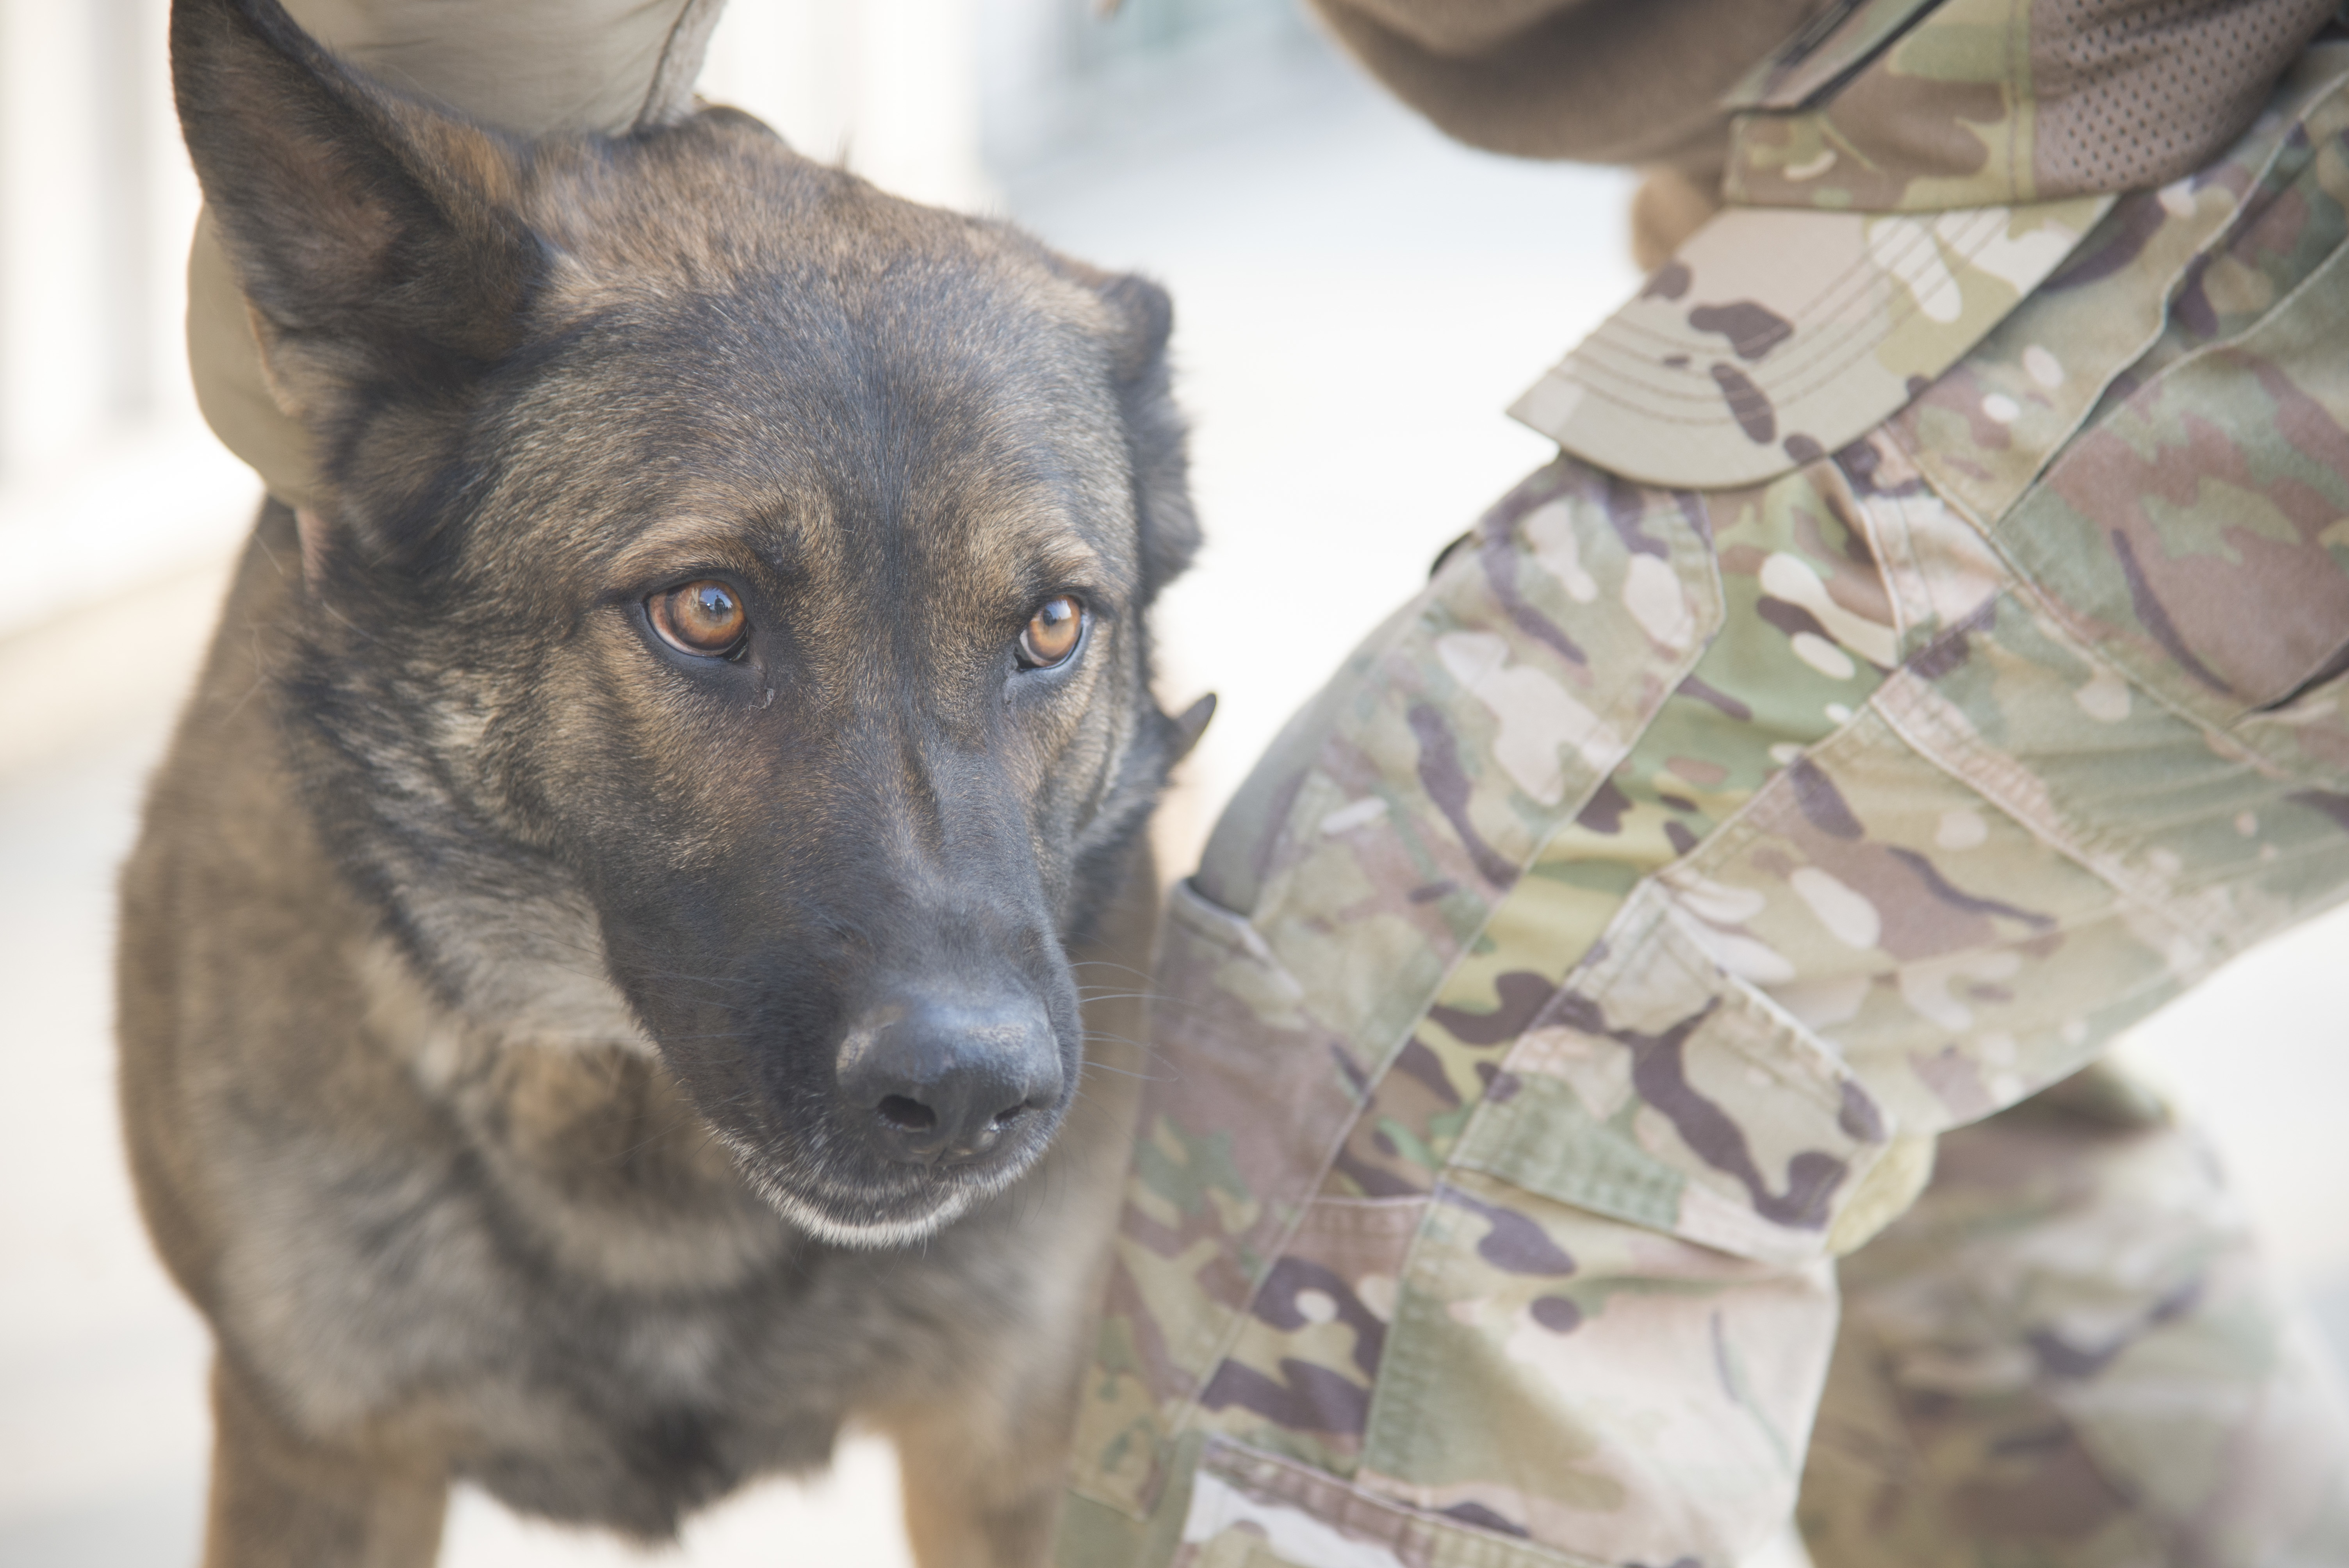 Military working dog handlers key to security